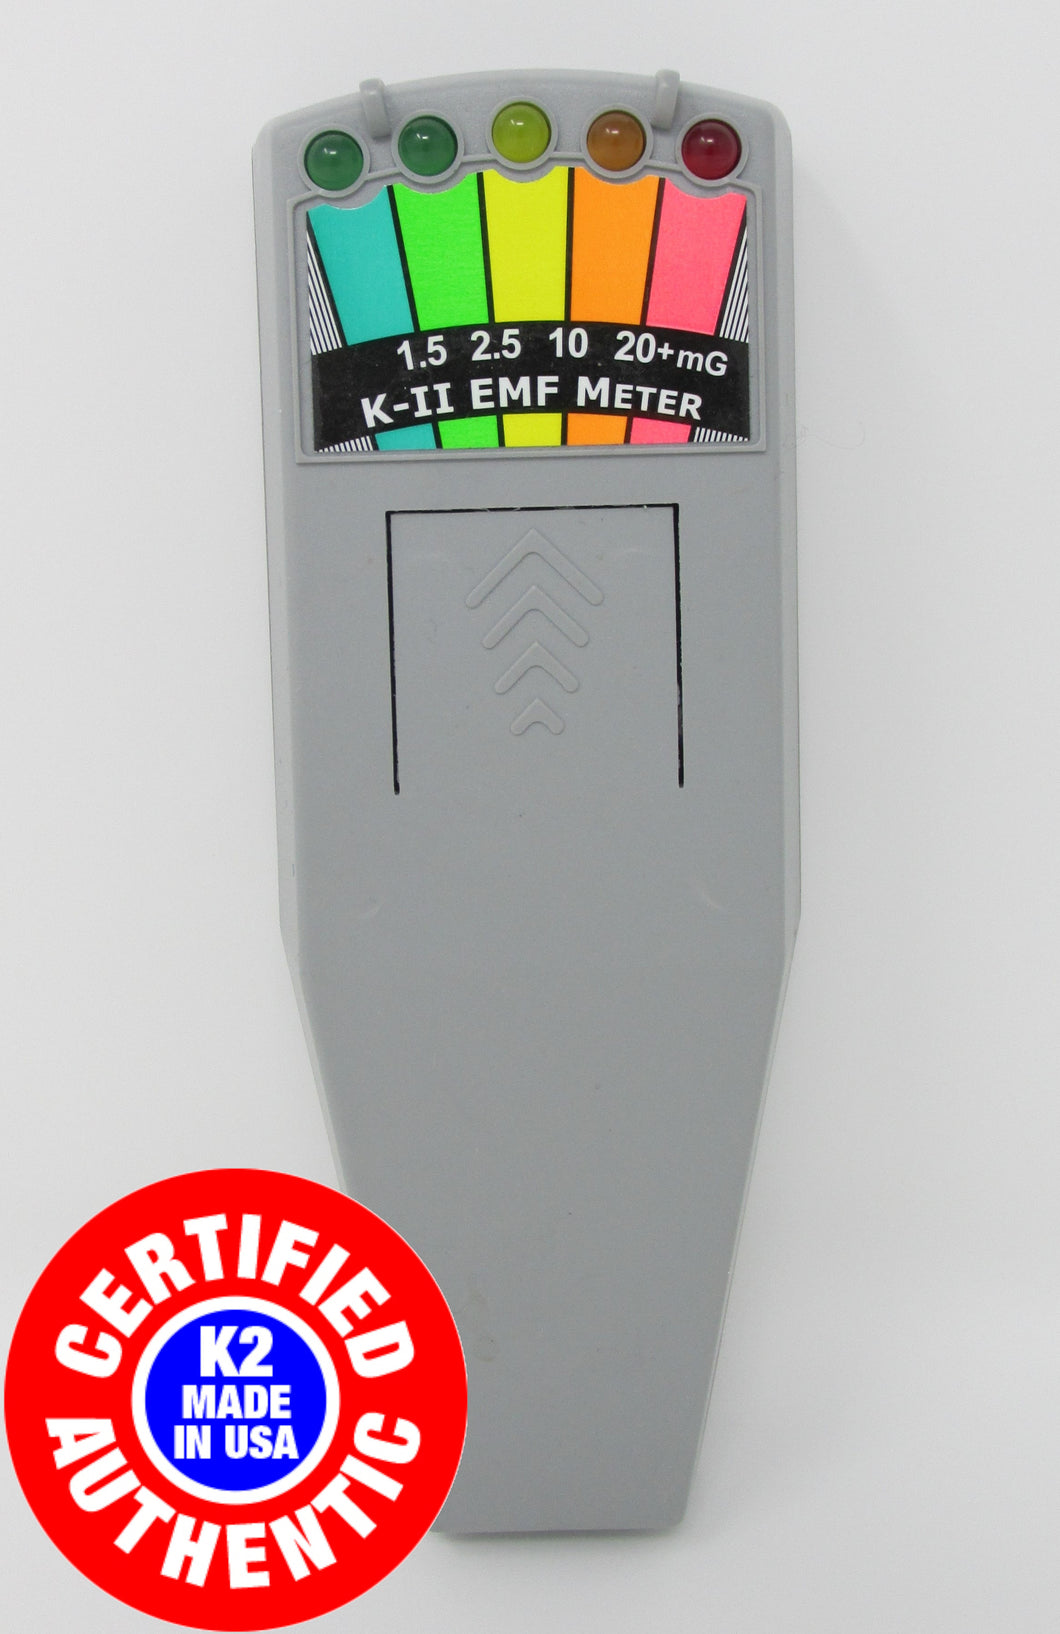 Wholesale k2 meter To Test Electronic Equipment 